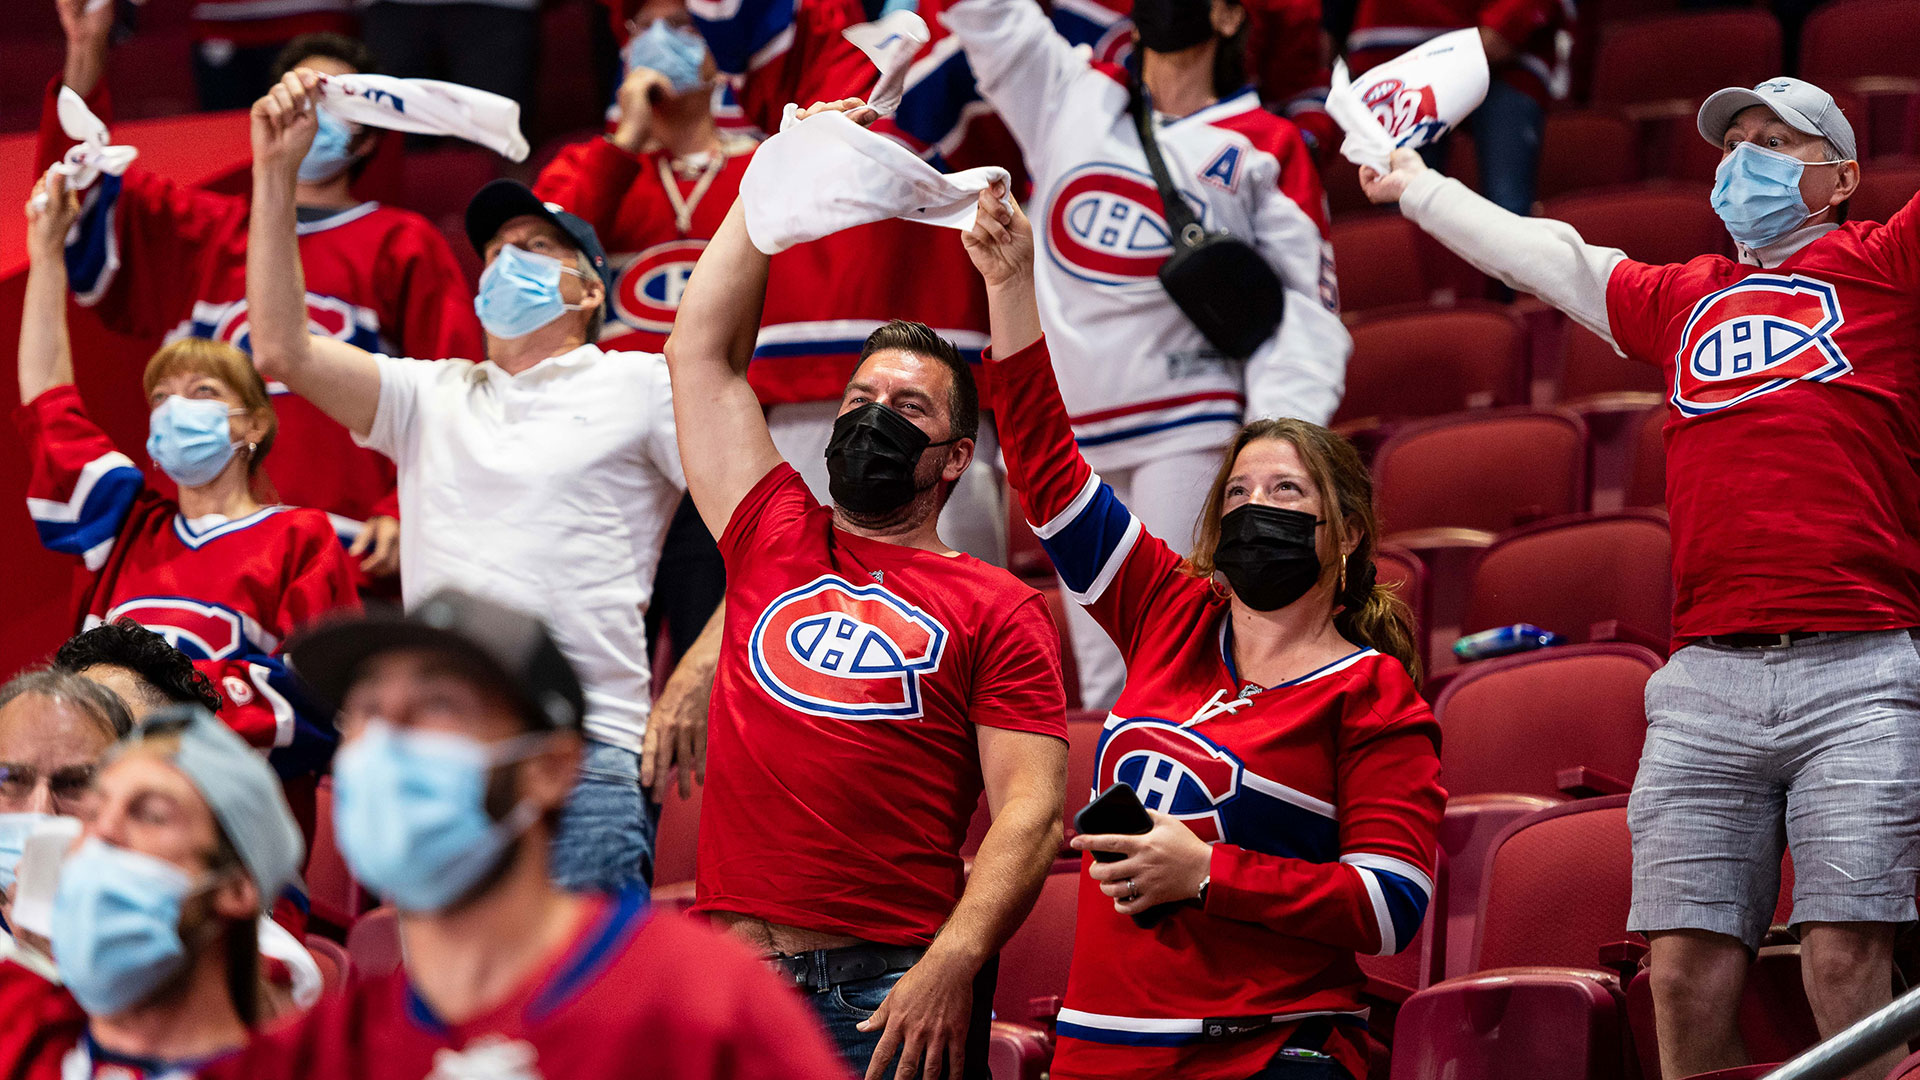 fans-masques-des-habs-a-montreal.jpg